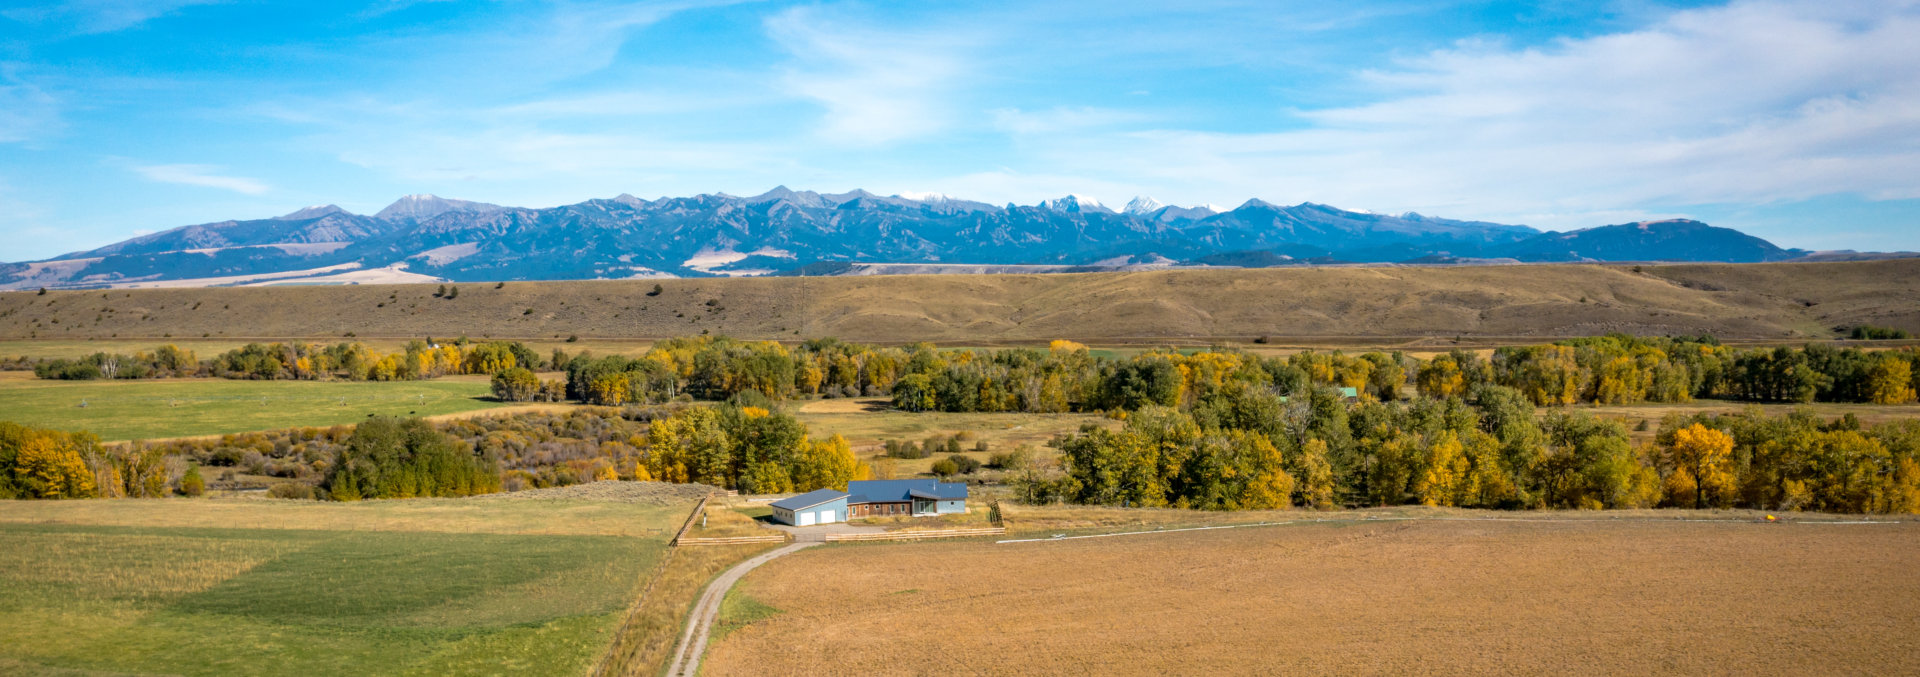 montana ranch for sale spring river farm on the shields river